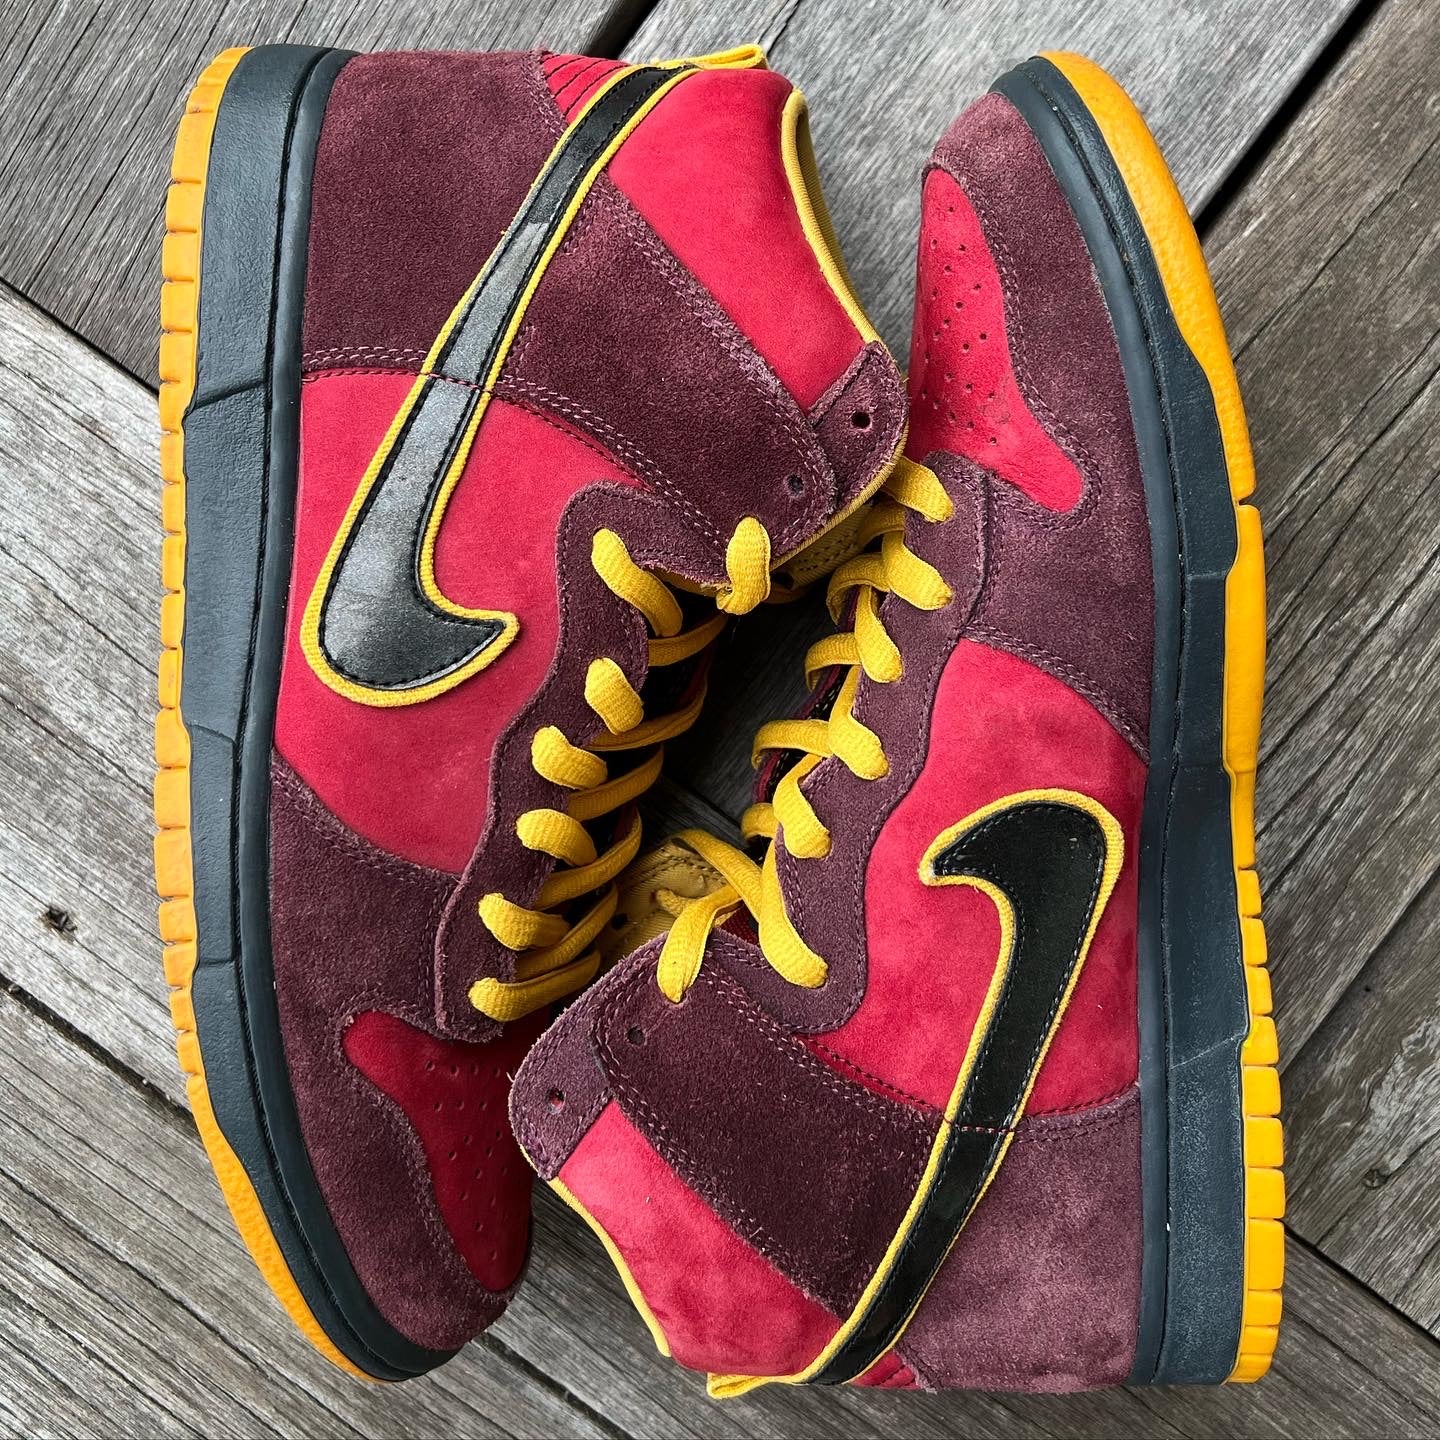 Details 181+ iron man sneakers nike latest